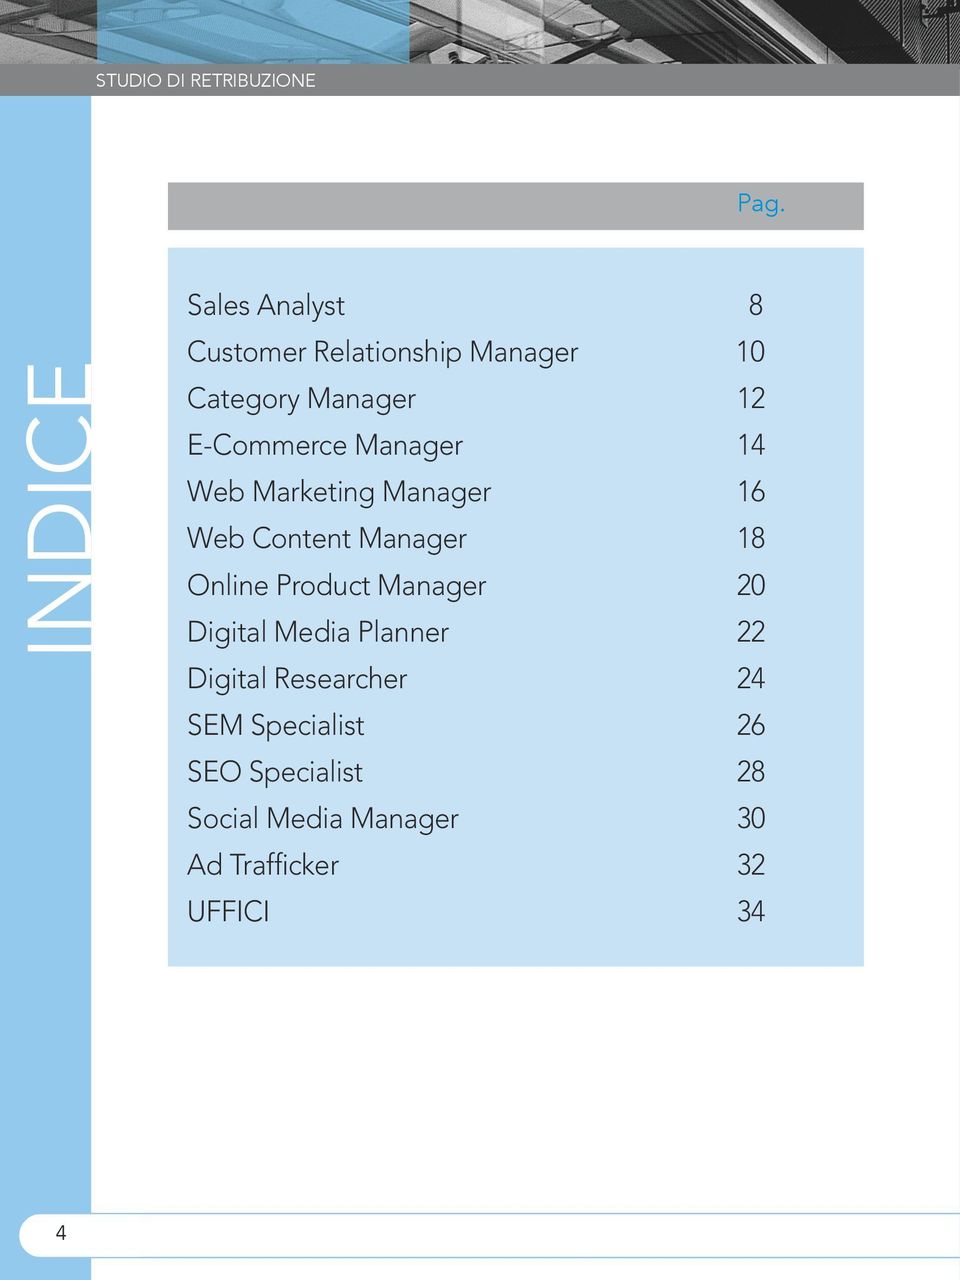 E-Commerce Manager 14 Web Marketing Manager 16 Web Content Manager 18 Online